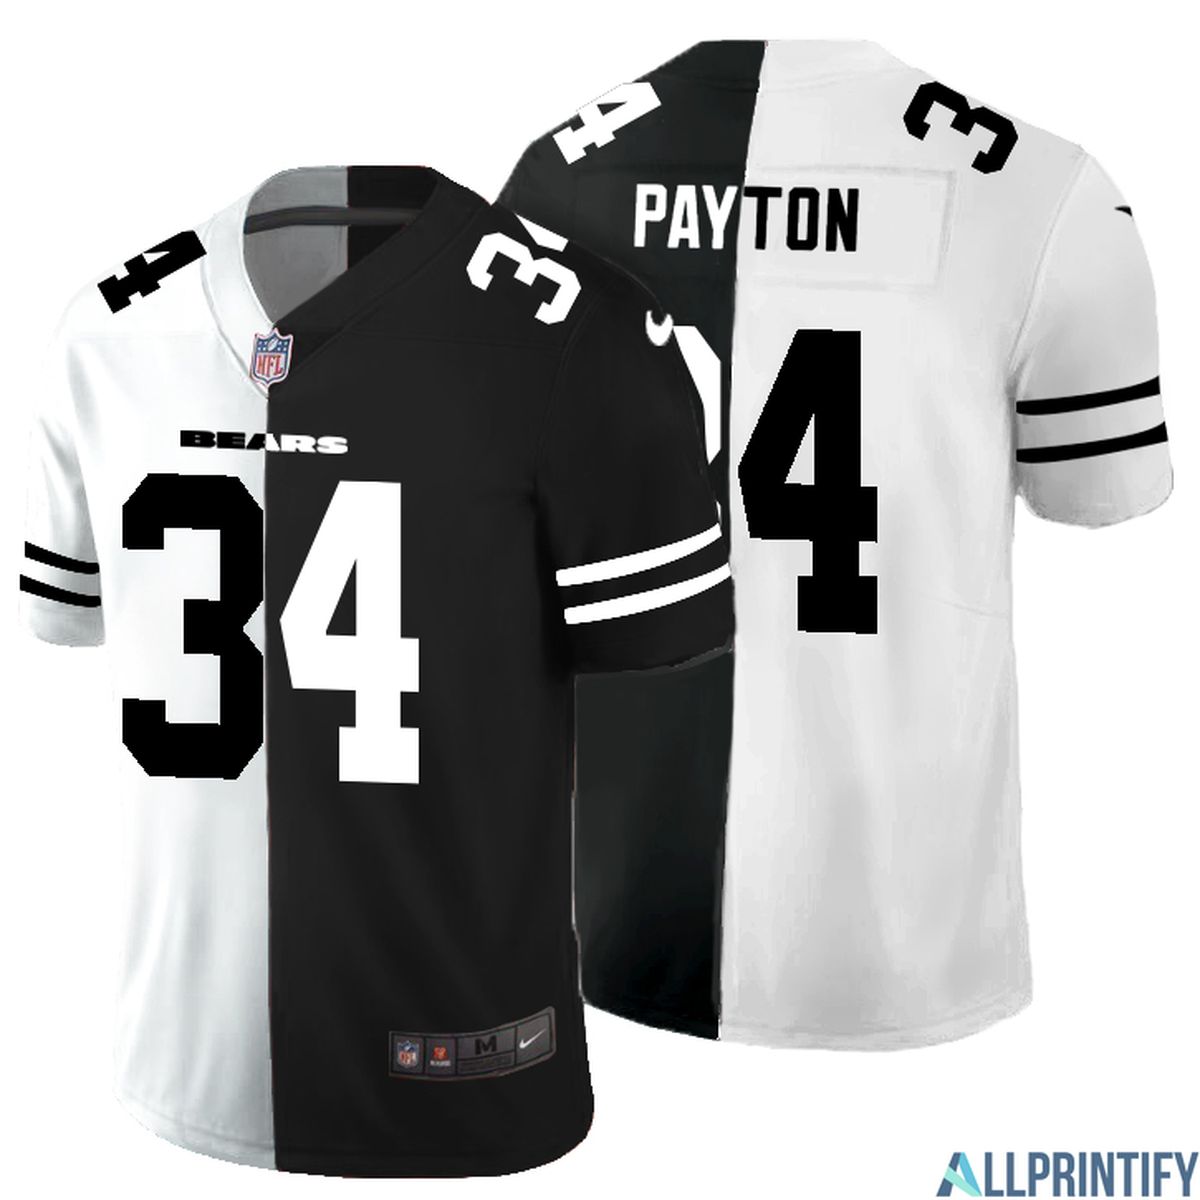 Walter Payton Chicago Bears 34 Black And White Vapor Limited Jersey